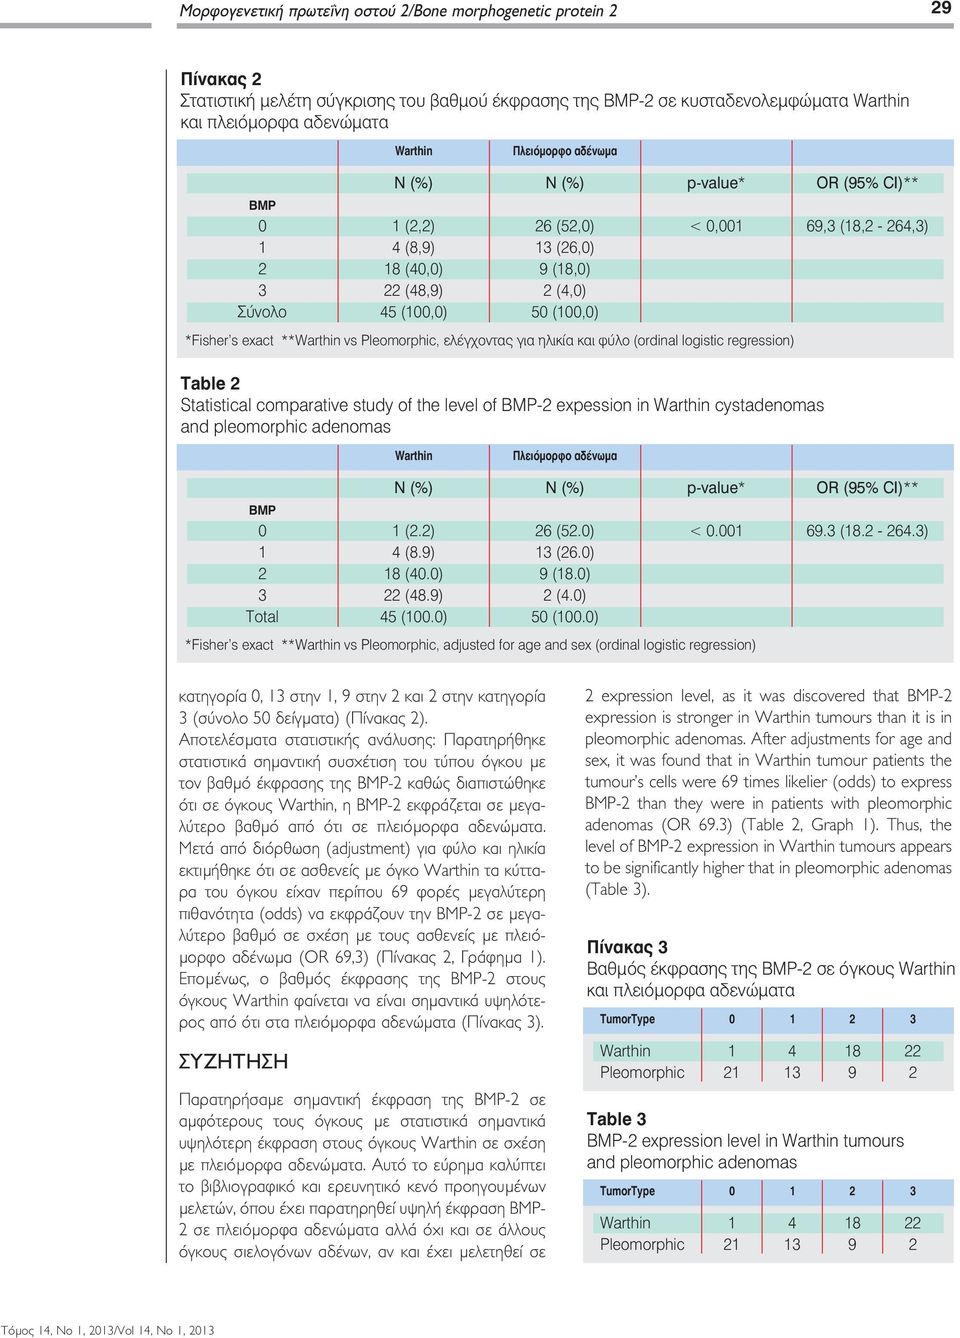 regression) OR (95% CI)** 69, (8, - 64,) Table Statistical comparative study of the level of BMP- expession in cystadenomas and pleomorphic adenomas Πλειόµορφο αδένωµα BMP 0 Total N (%) (.) 4 (8.